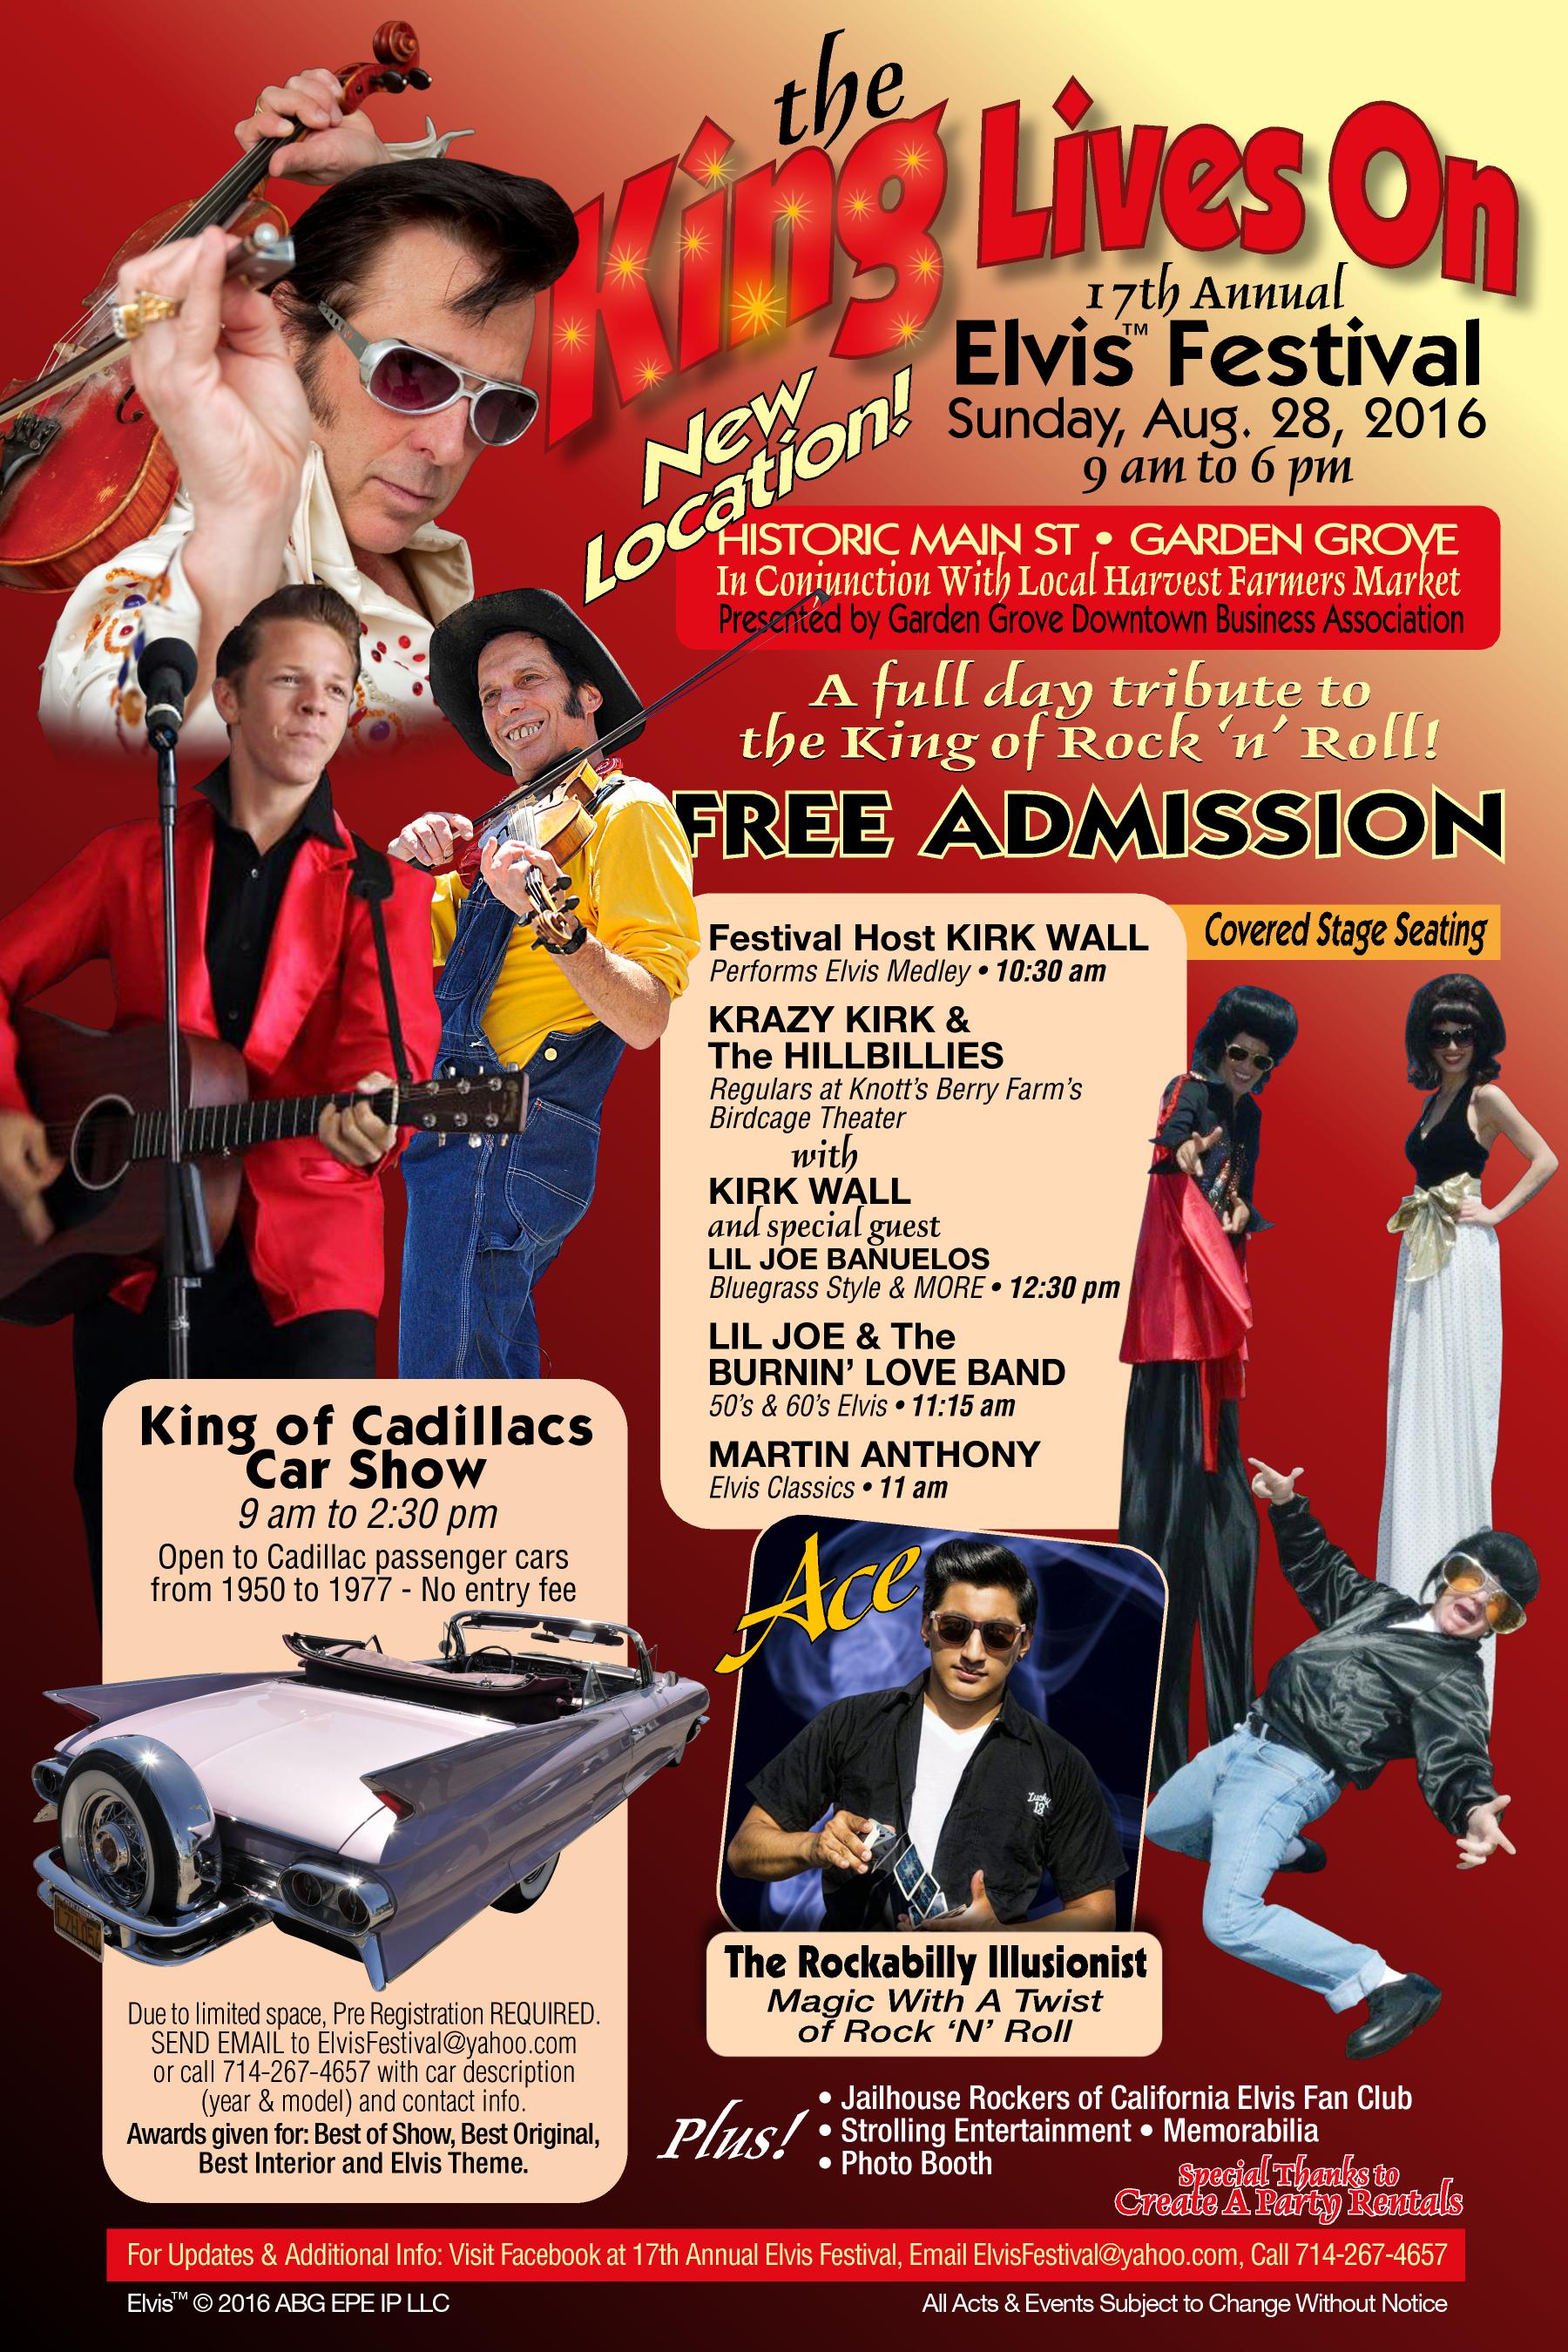 Elvis Festival Ready to Shake, Rattle and Roll on Main Street City of